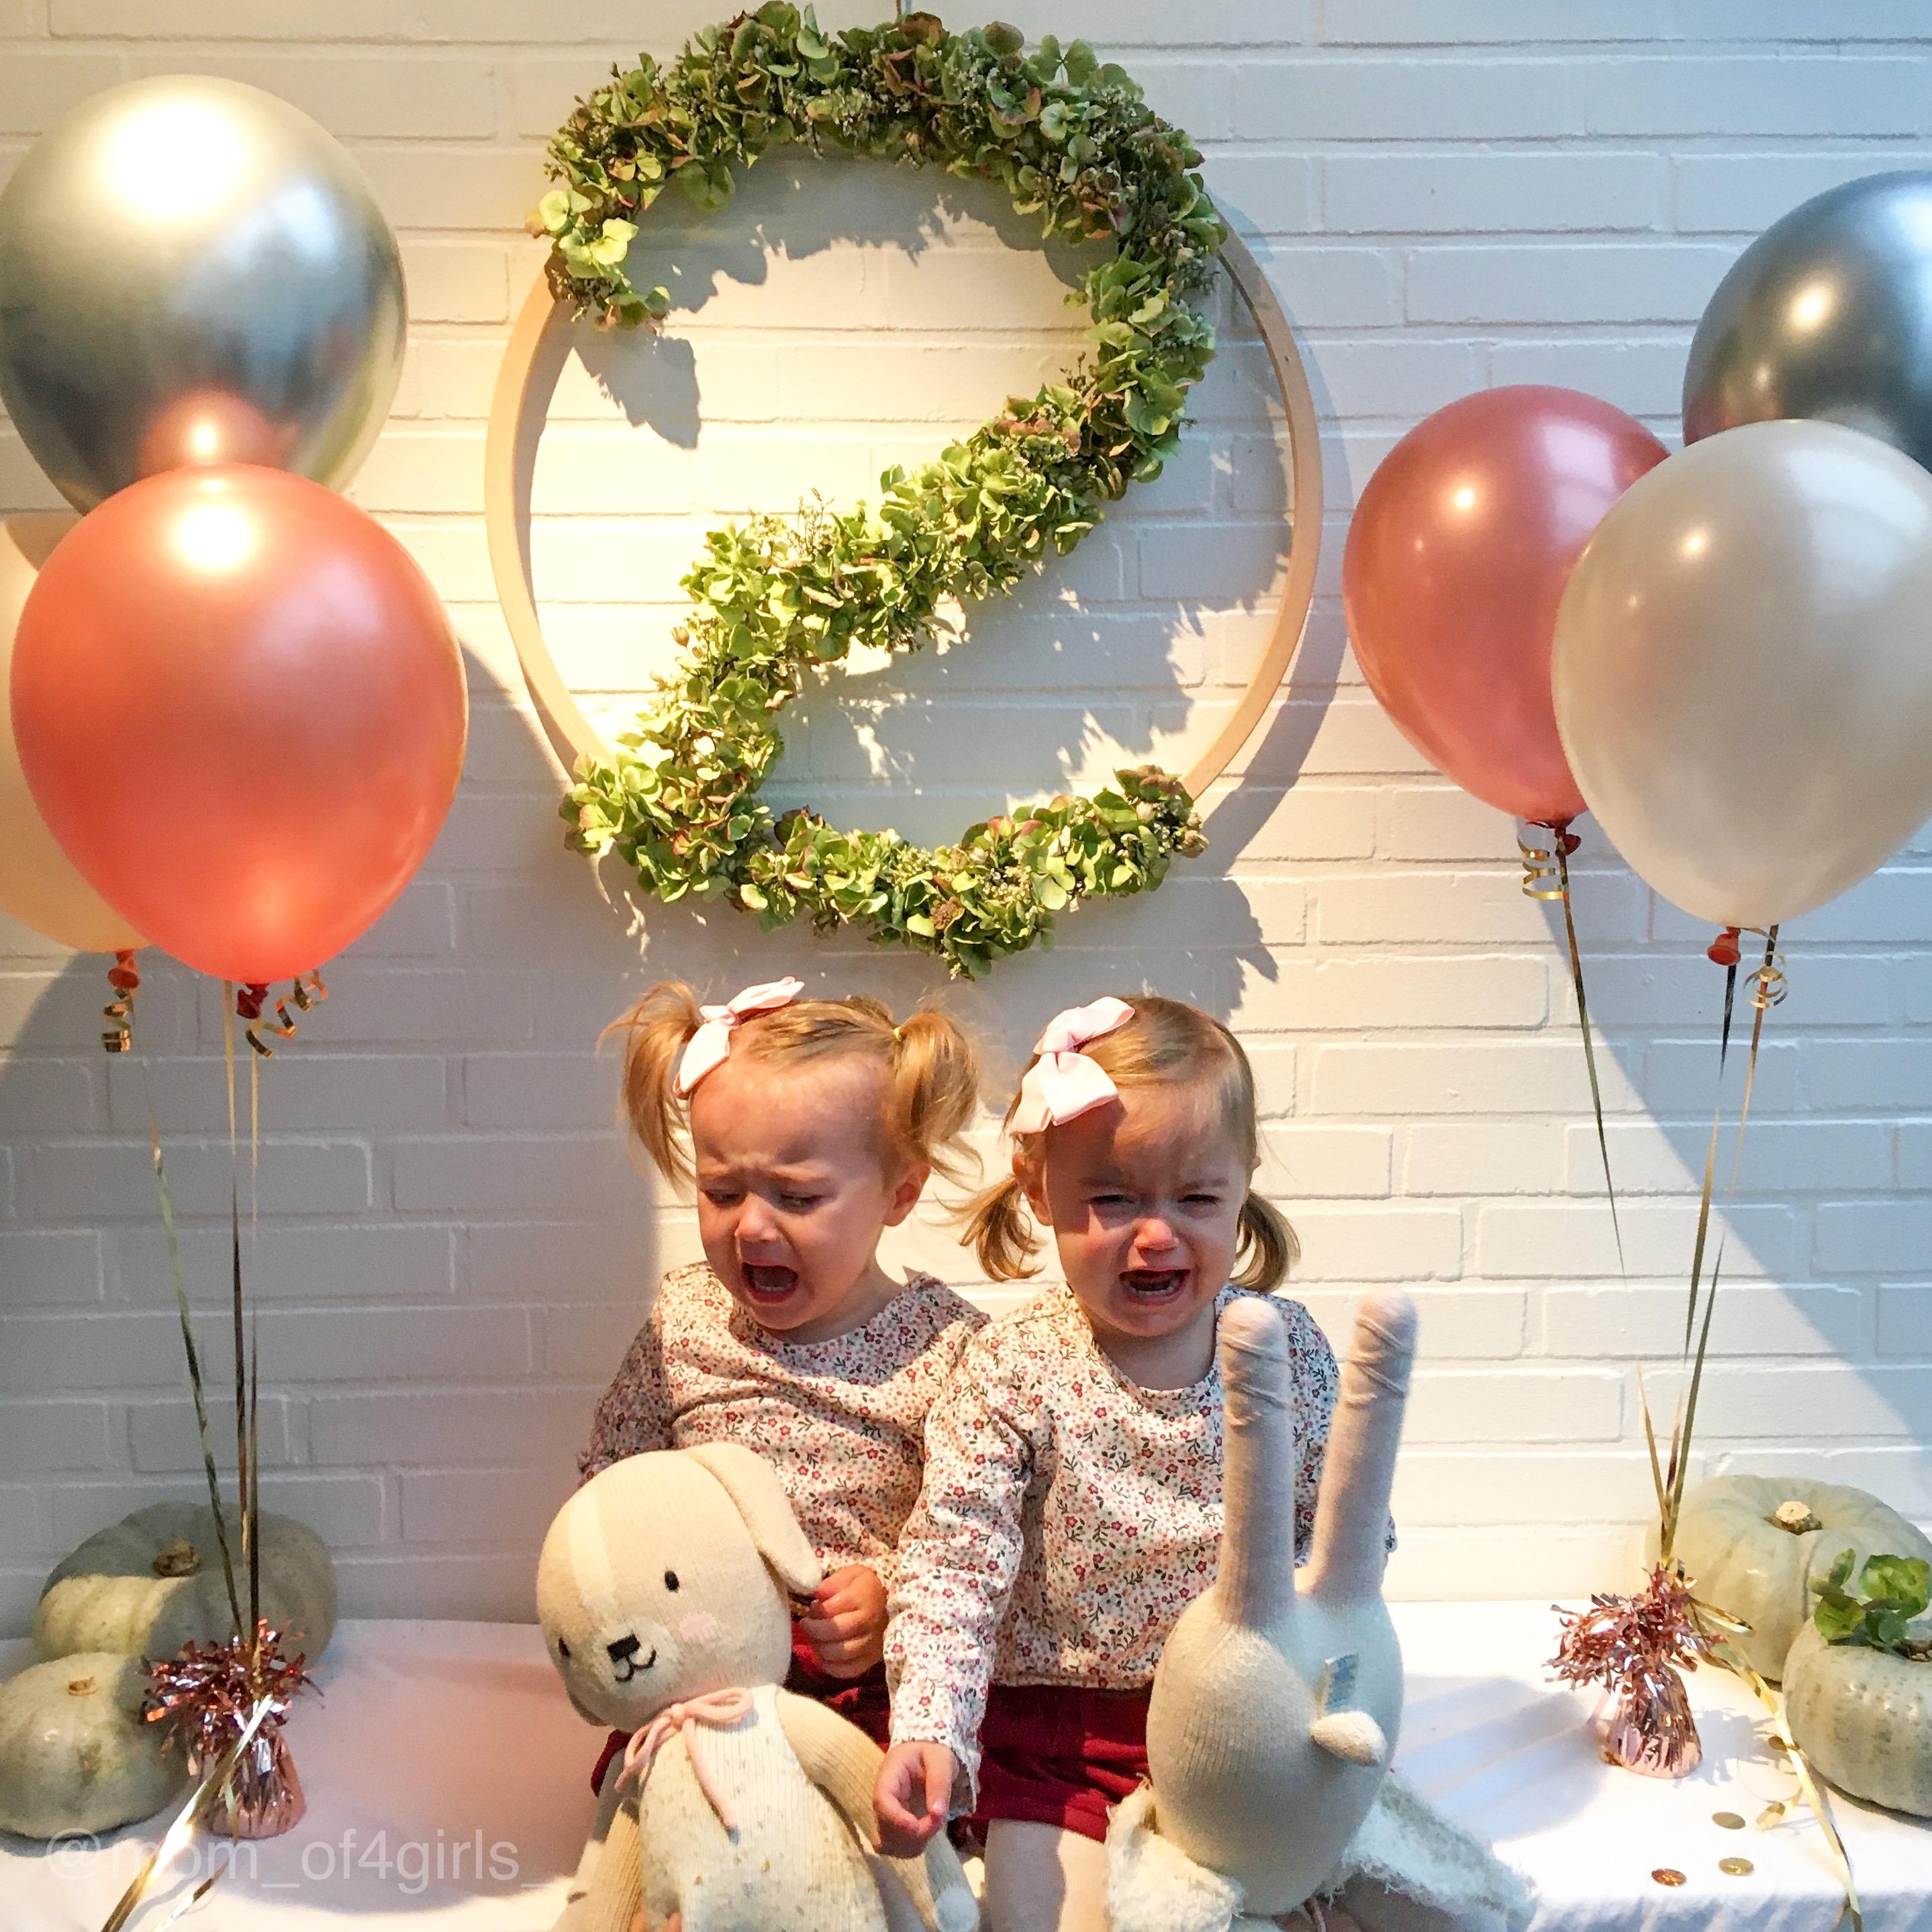 What do the twins think? #zwillinge #twinsbirthday #birthday #twins #geburtstag #geburtstagsfeier #geburtstagskind